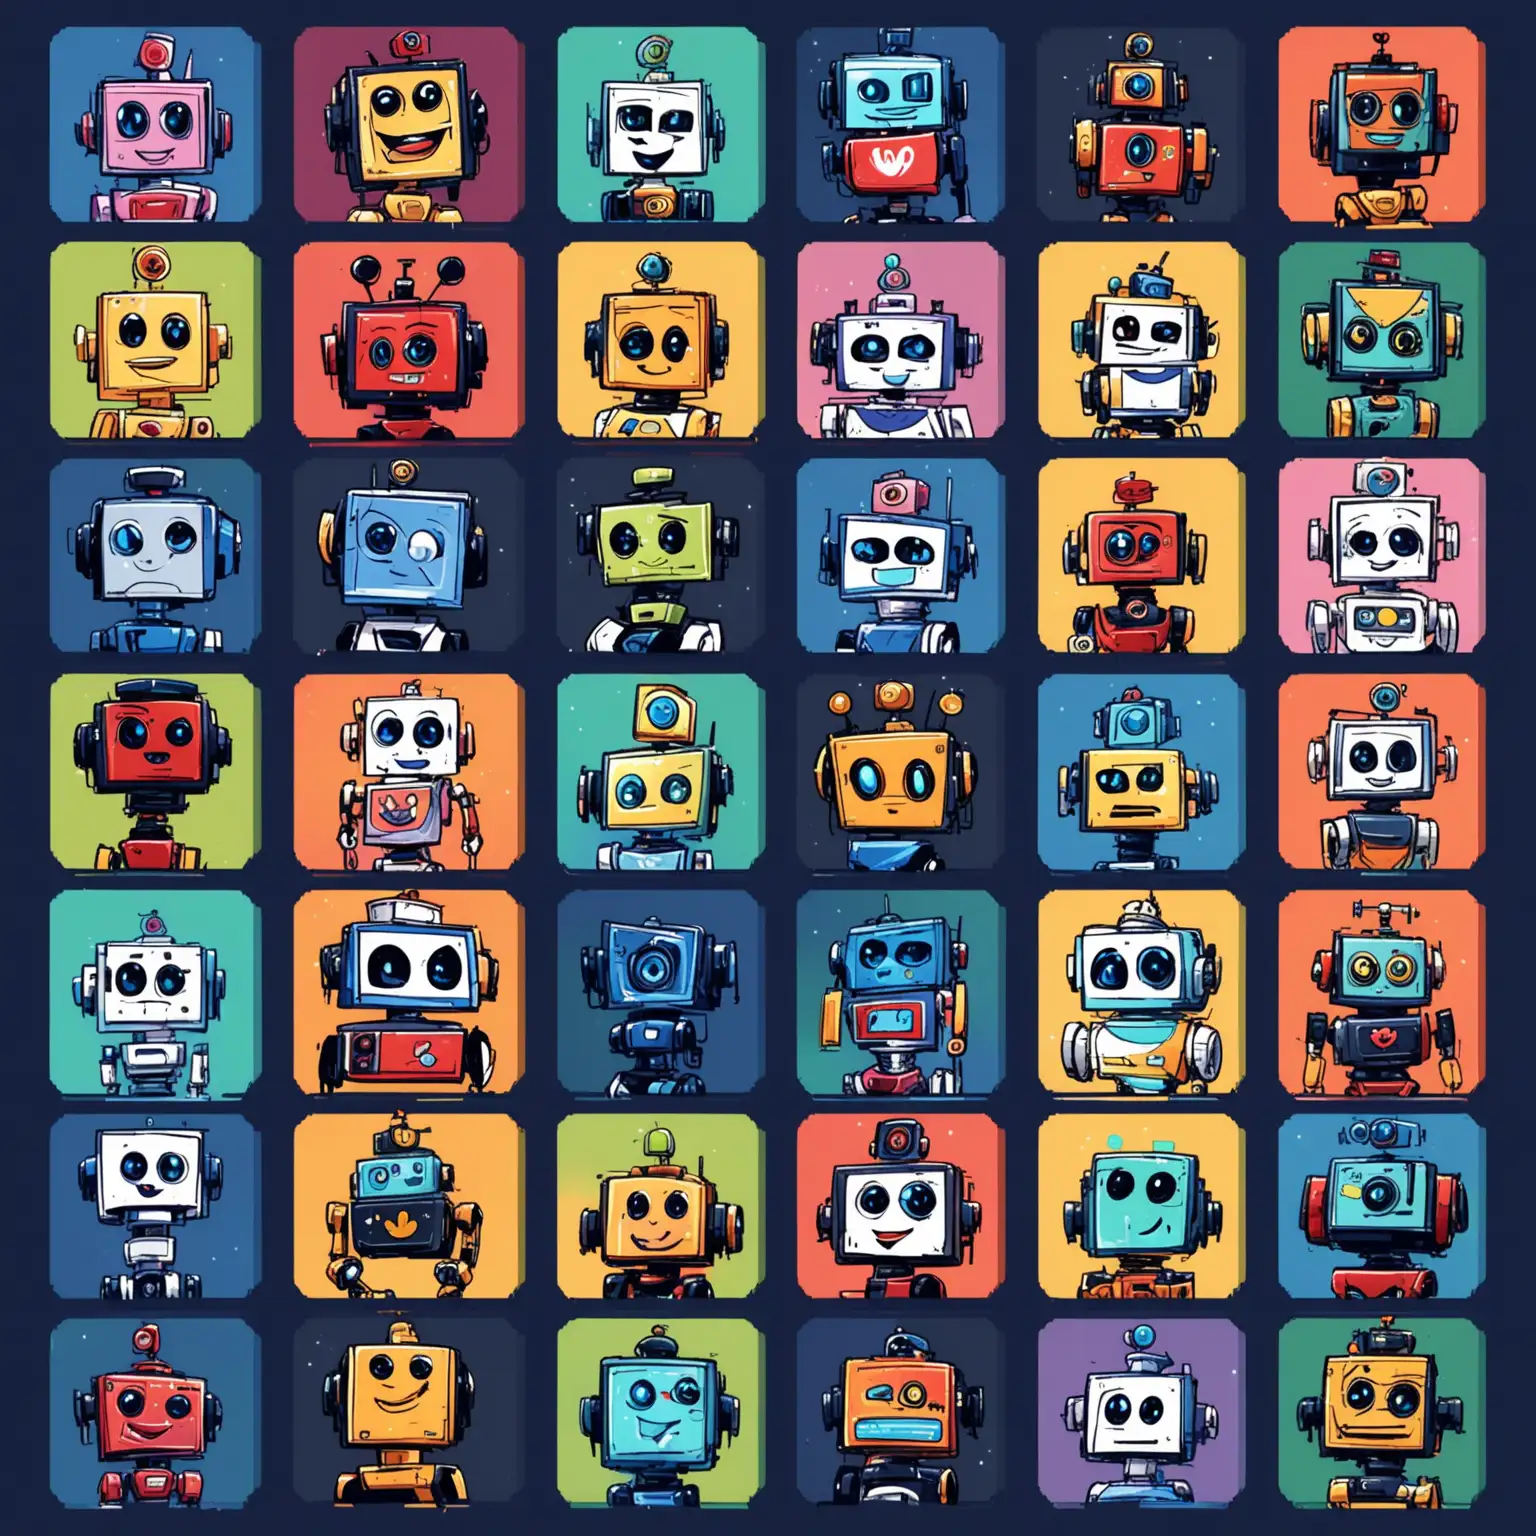 Robot-Icons-in-Disney-Style-for-Social-Media-Use